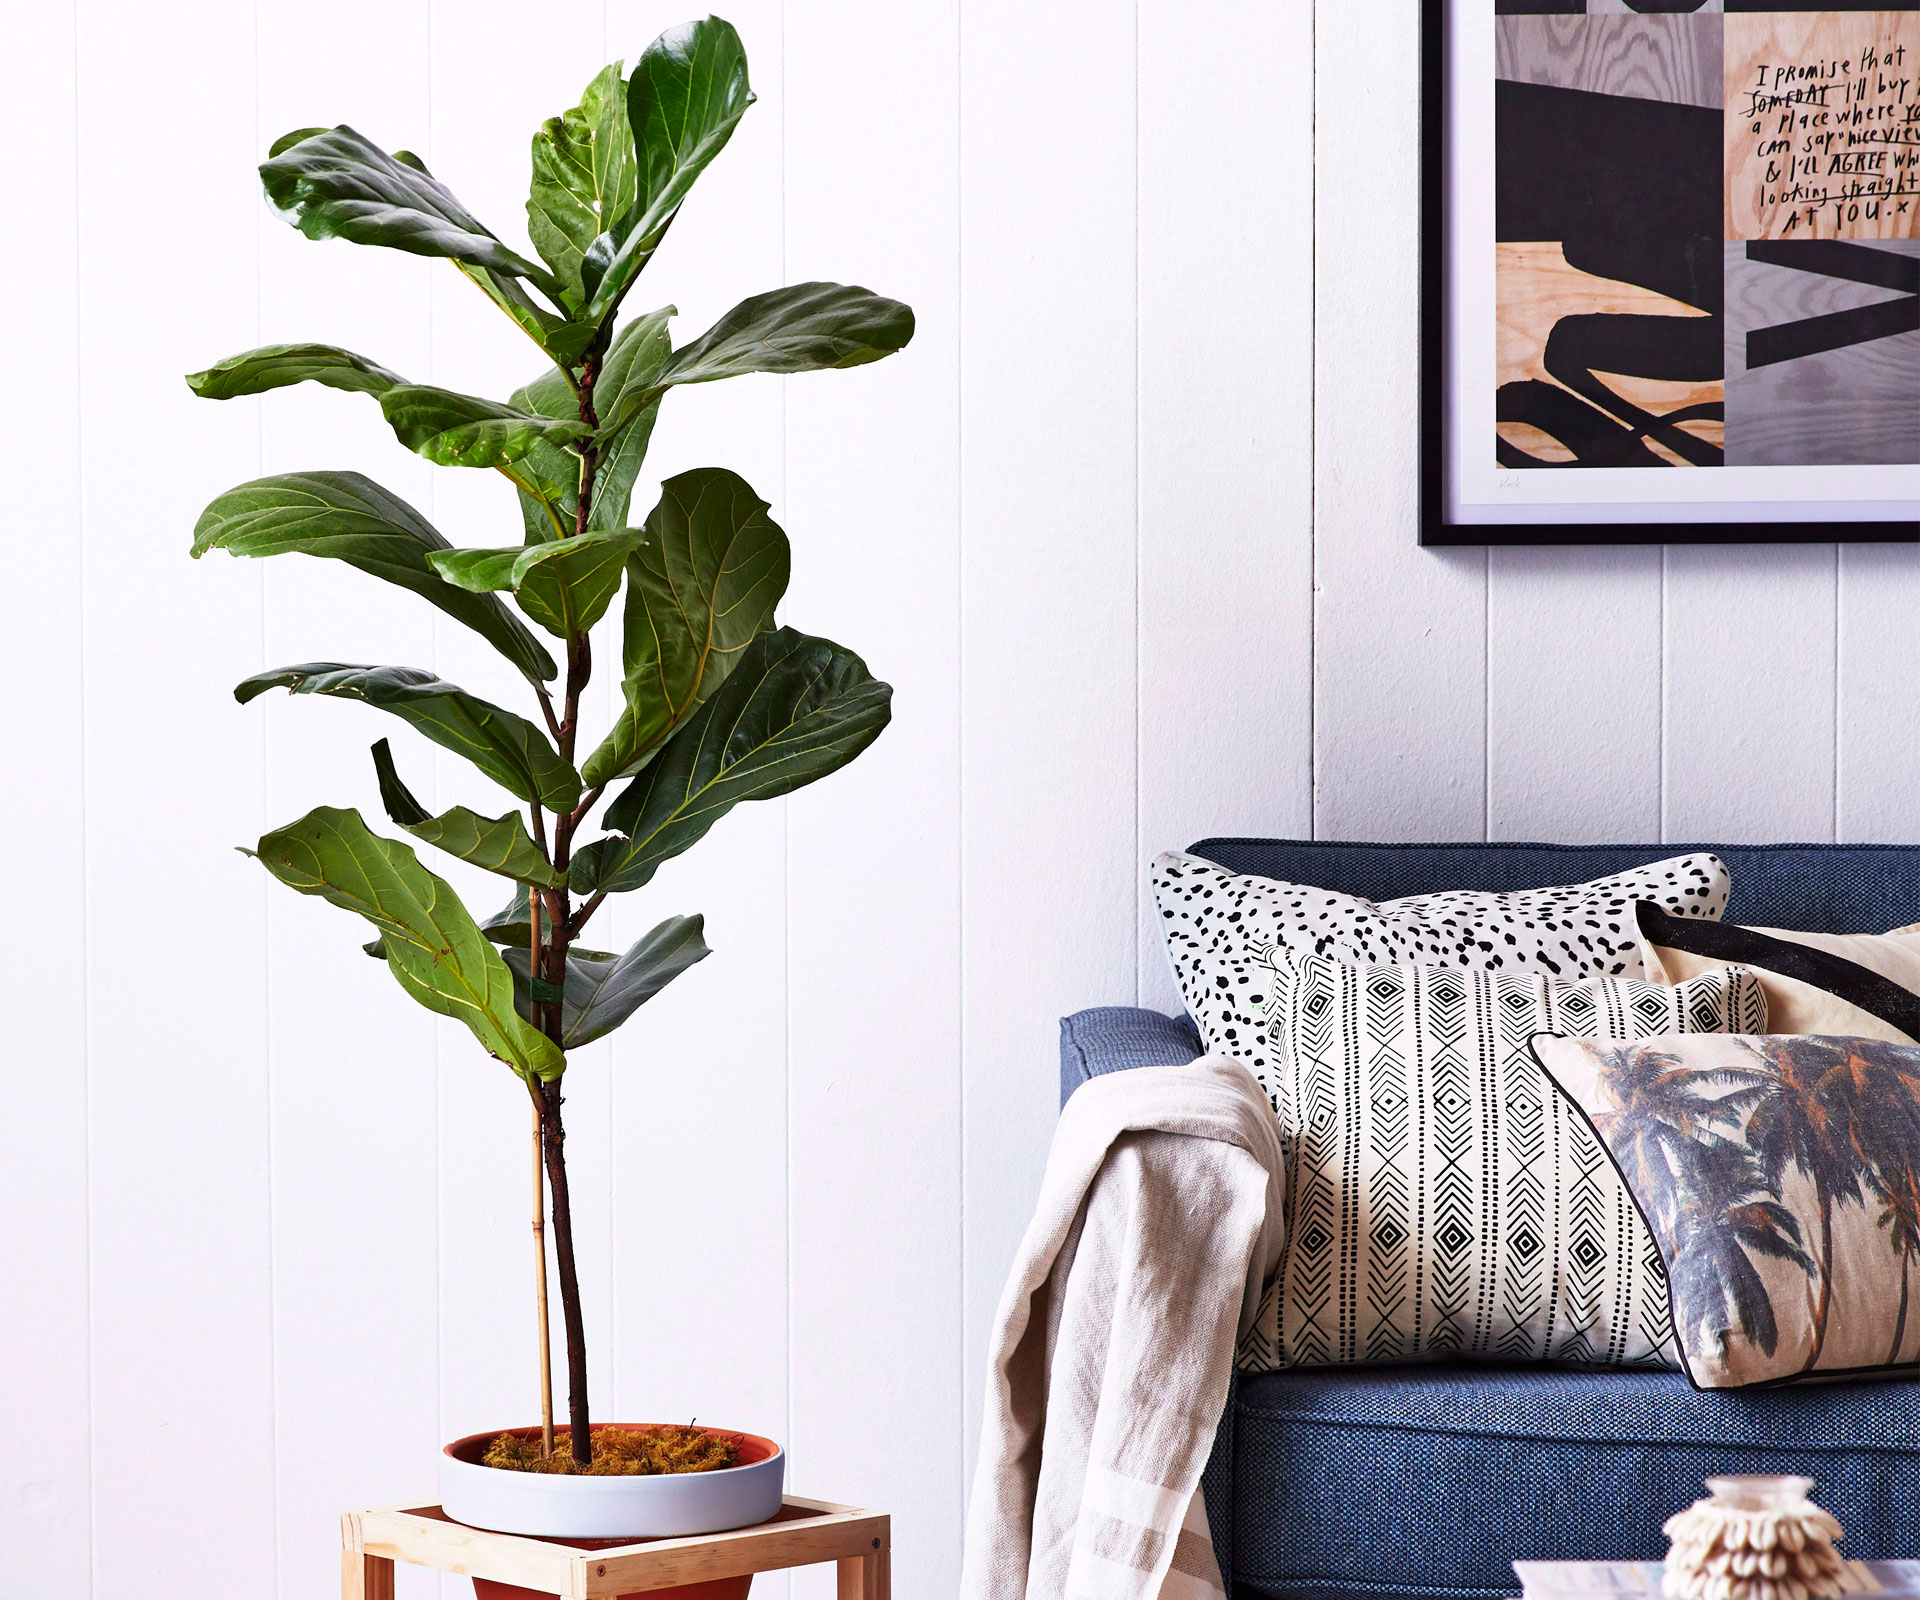 Top 10 indoor plants to choose for a busy household